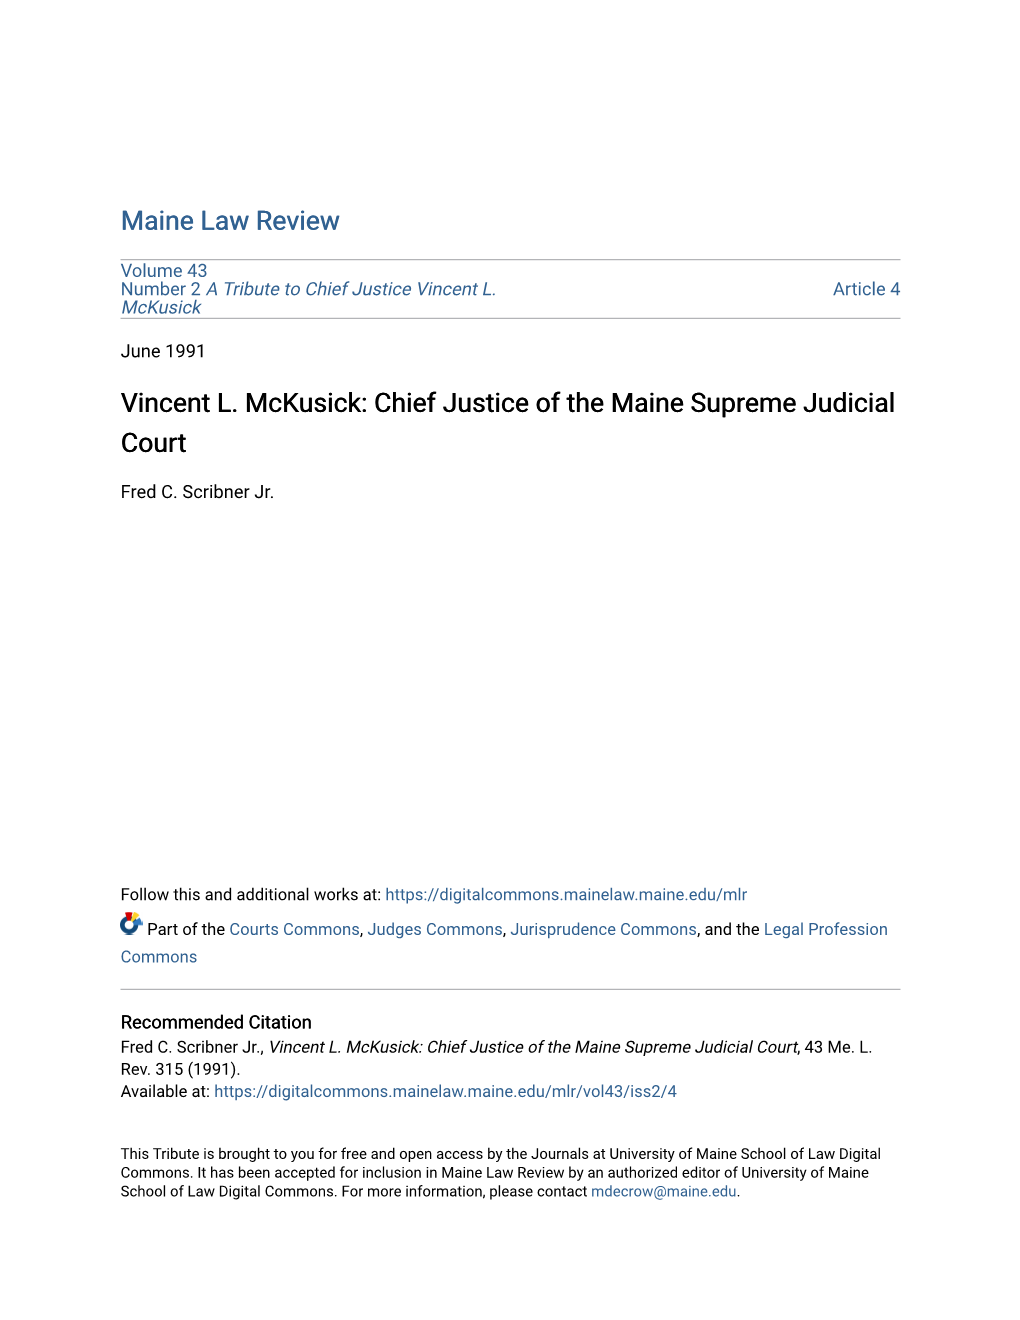 Chief Justice of the Maine Supreme Judicial Court